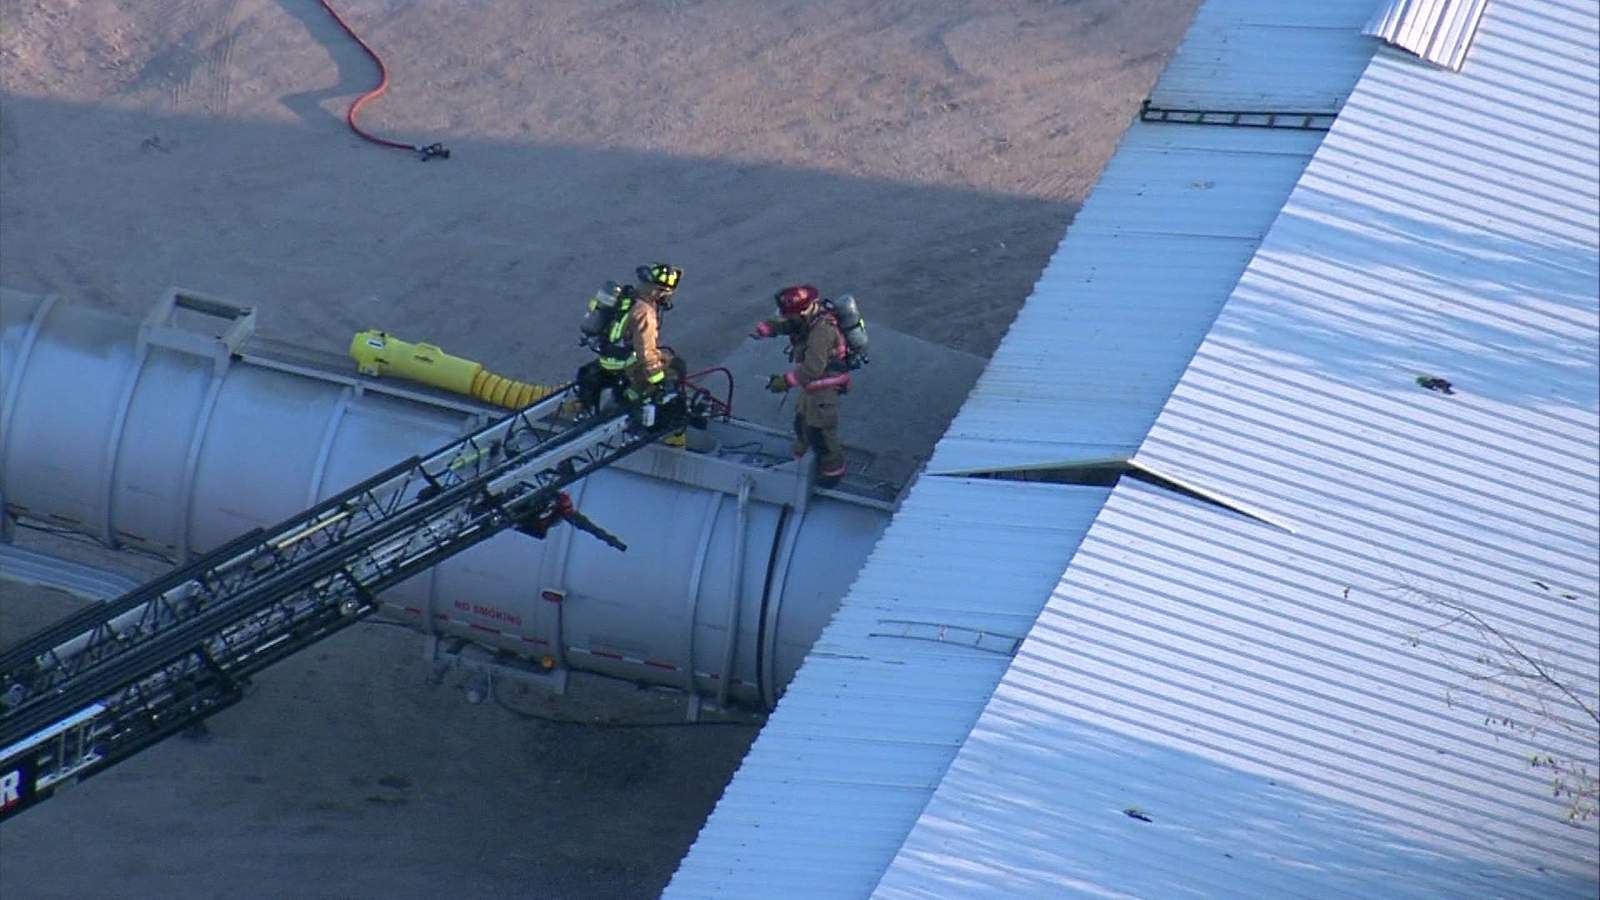 Worker dies while cleaning inside of tanker at Channelview business